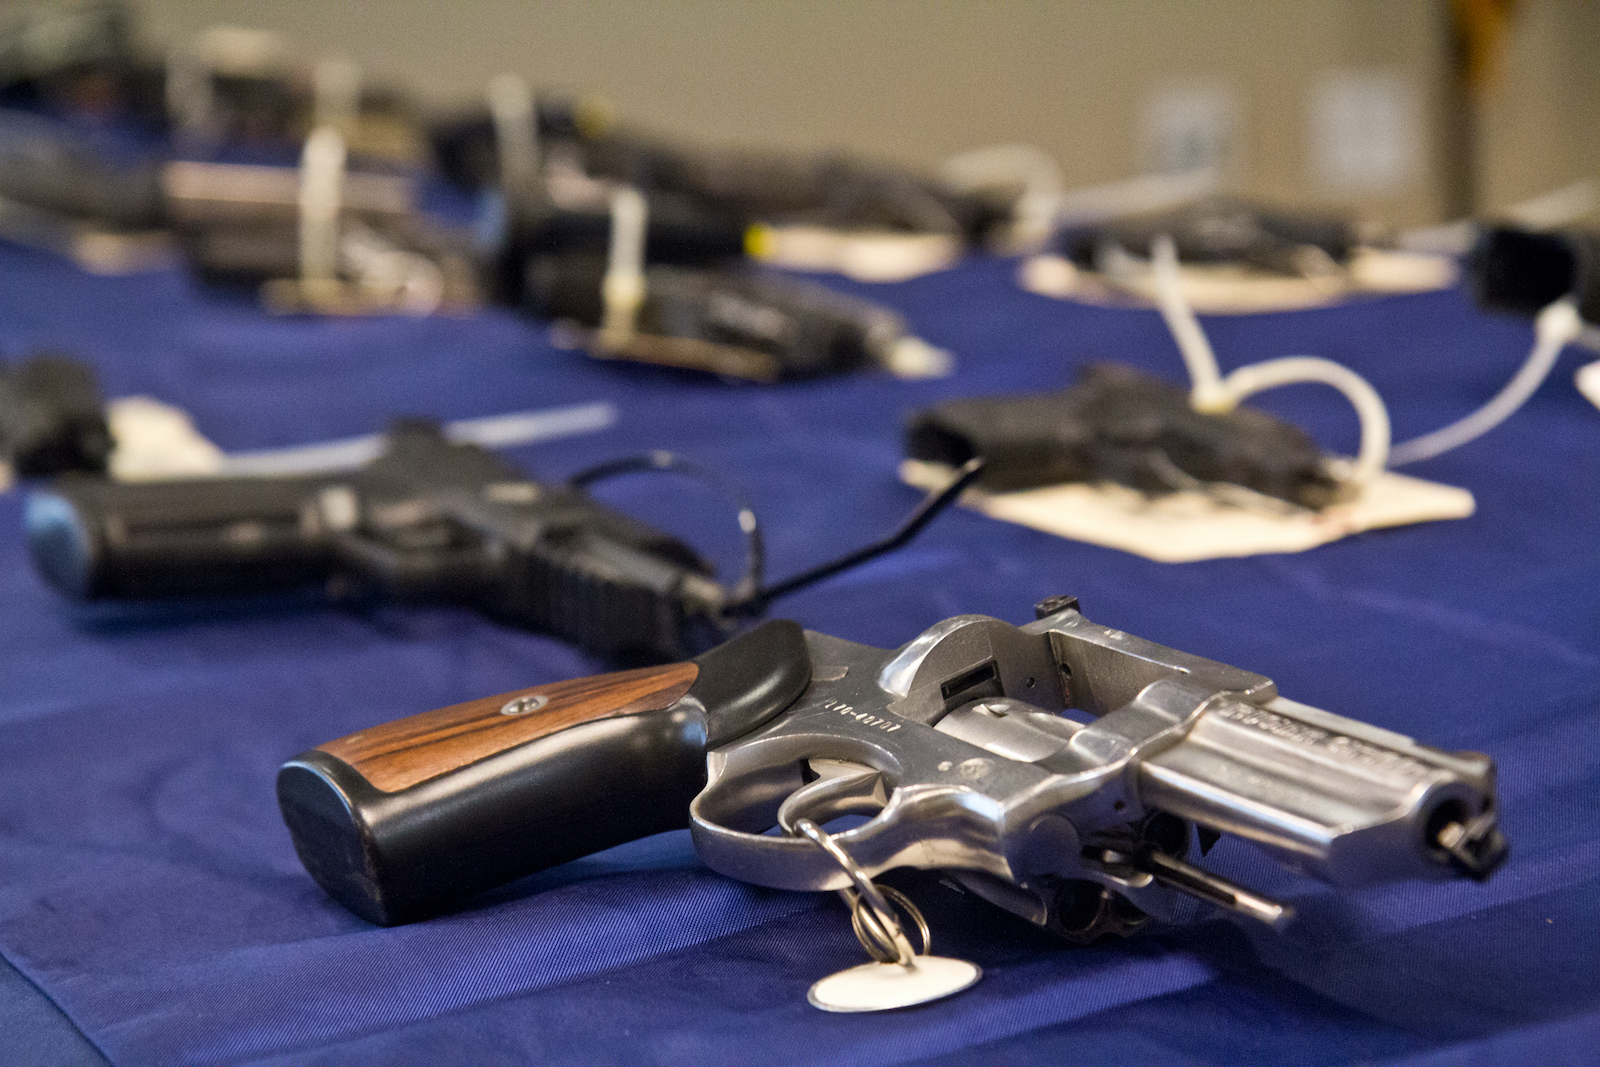 ATF officials announced two federal indictments of 14 individuals charged with trafficking about 500 firearms from the Southern states of Georgia and South Carolina to sell in Philadelphia, at a press conference on April 11, 2022. 